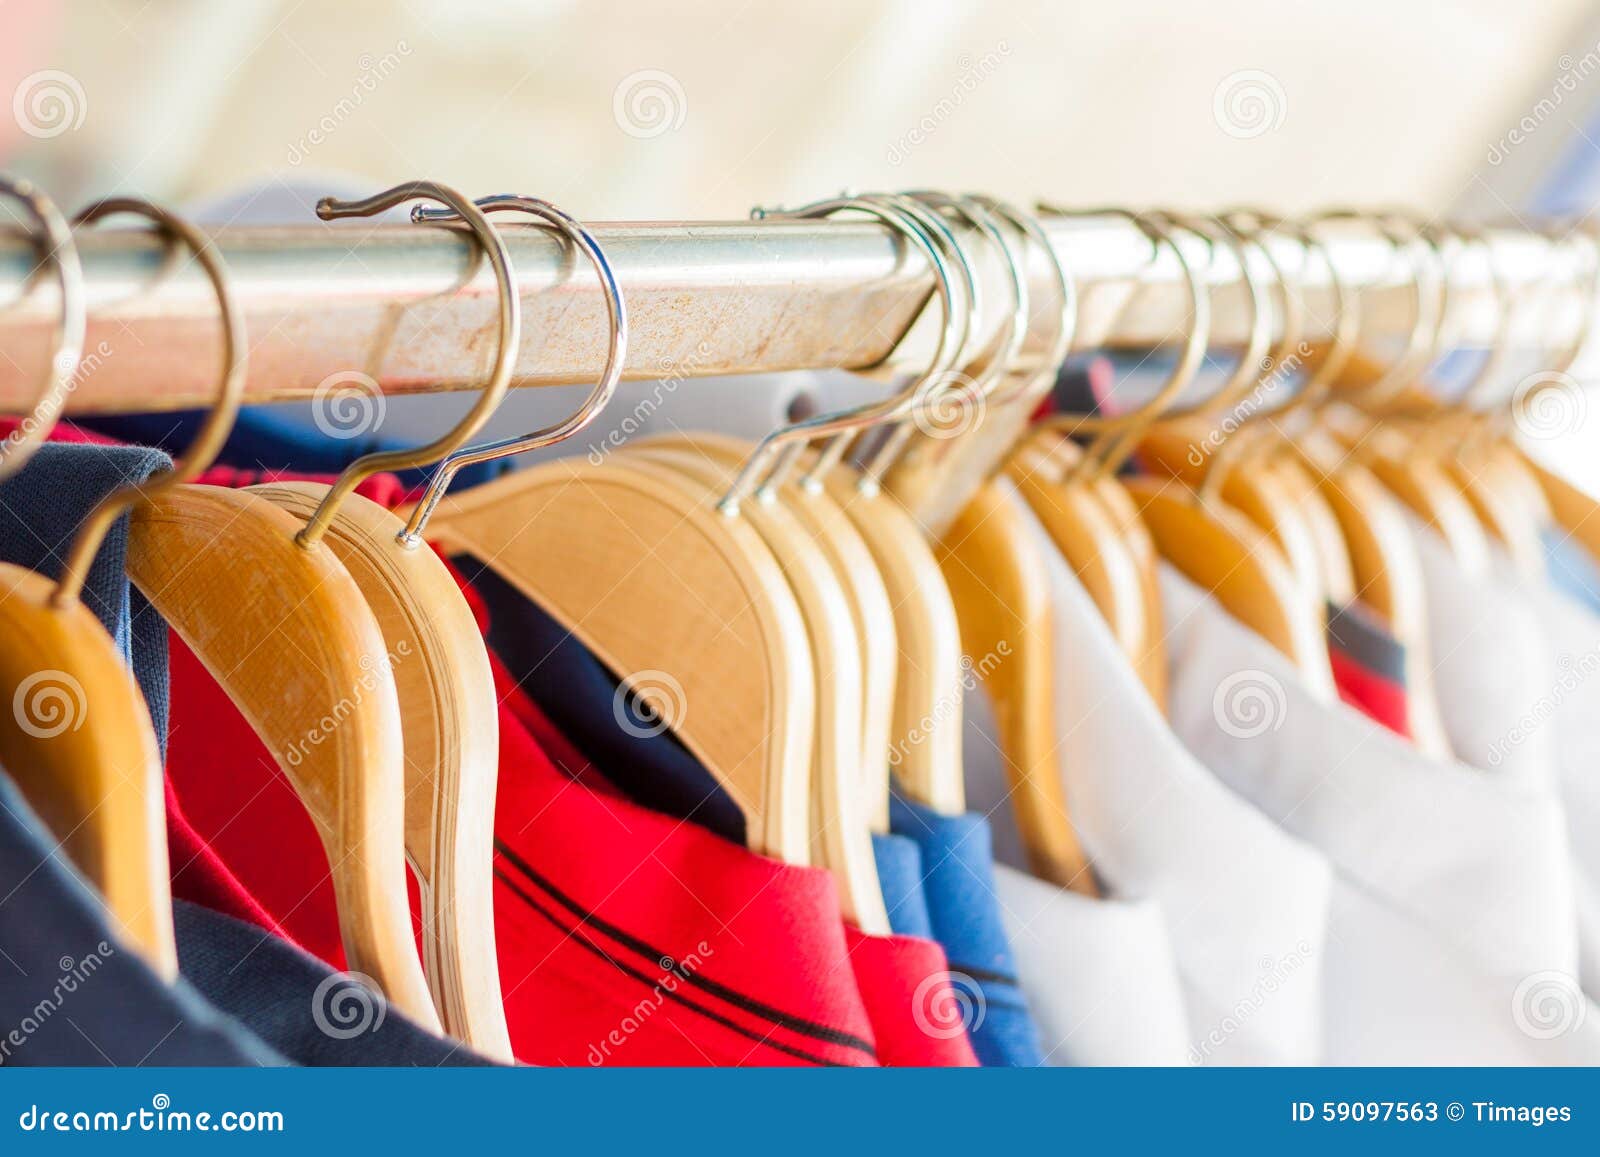 Clothes rail stock image. Image of line, retail, rack - 59097563